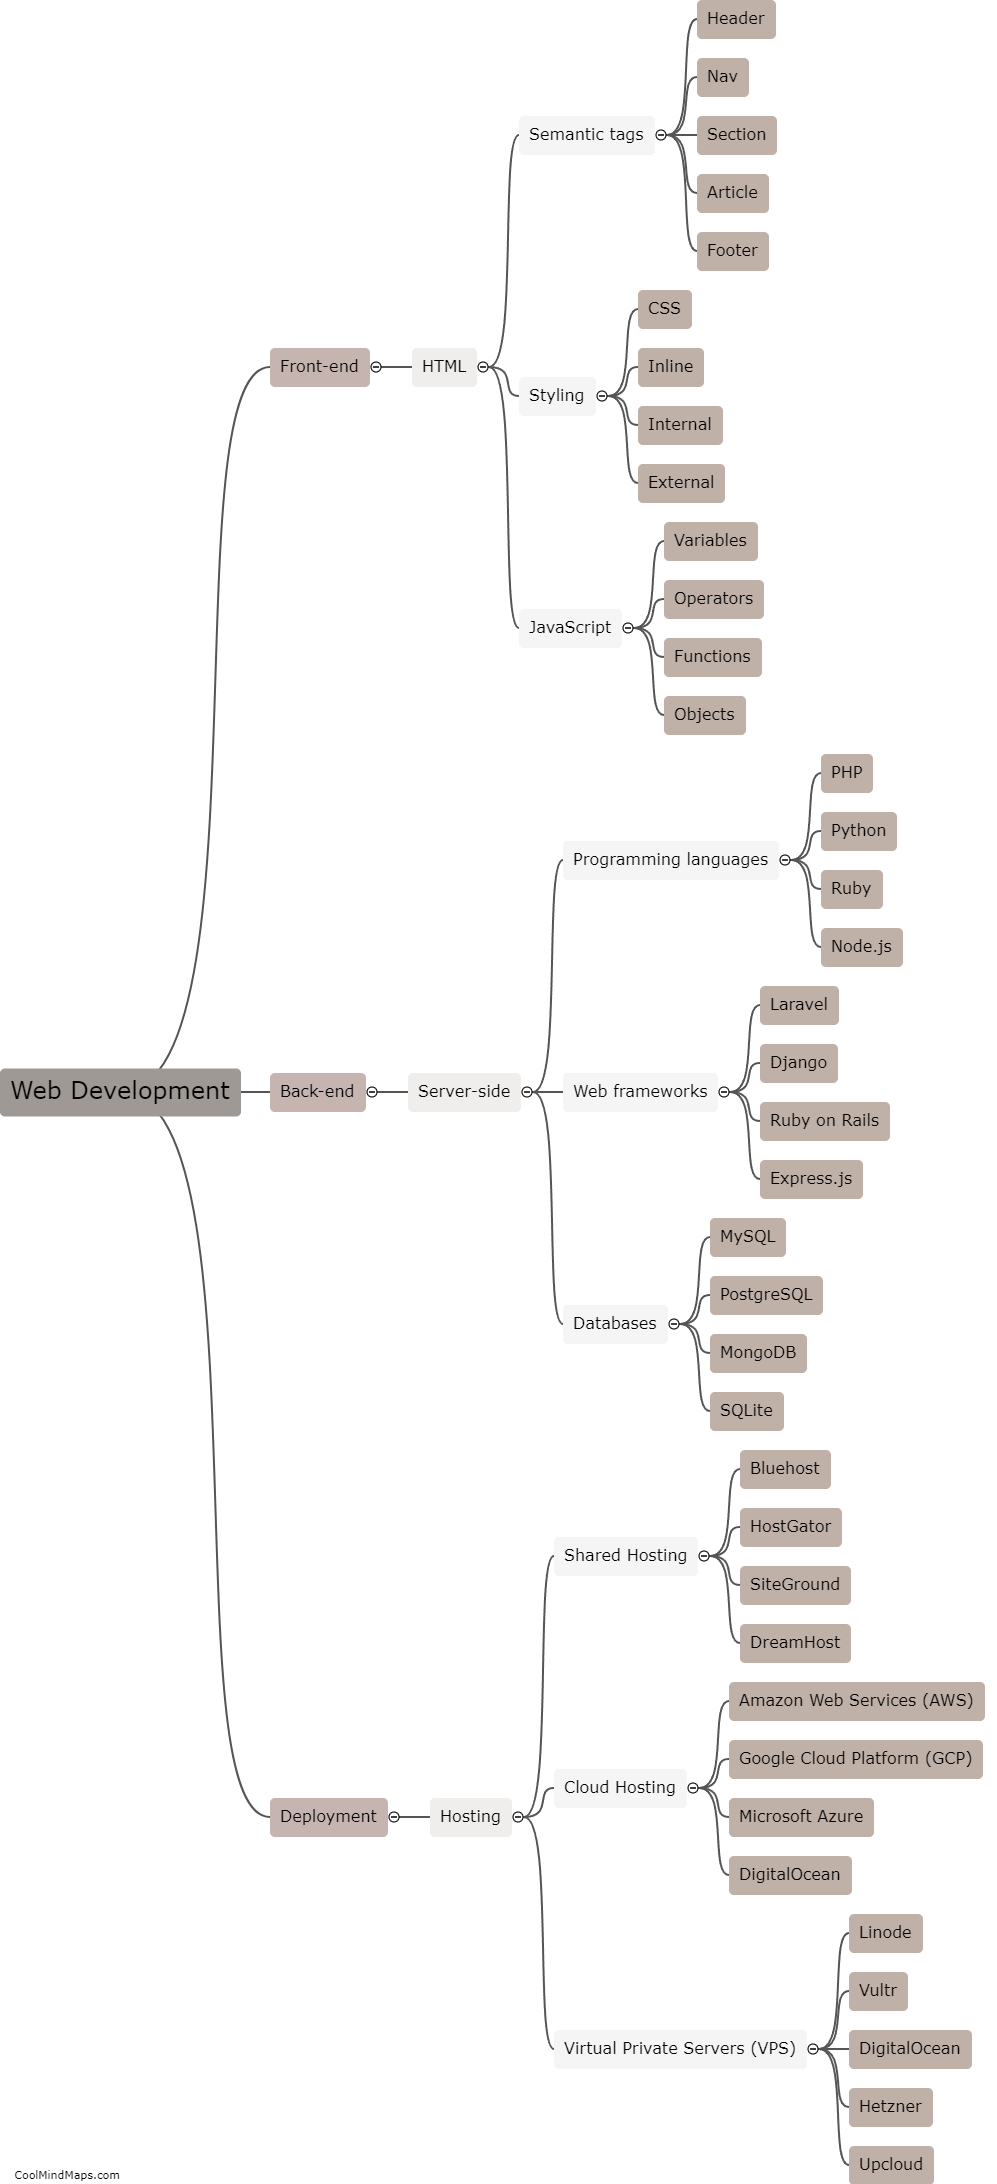 How to create a mind map for web development?